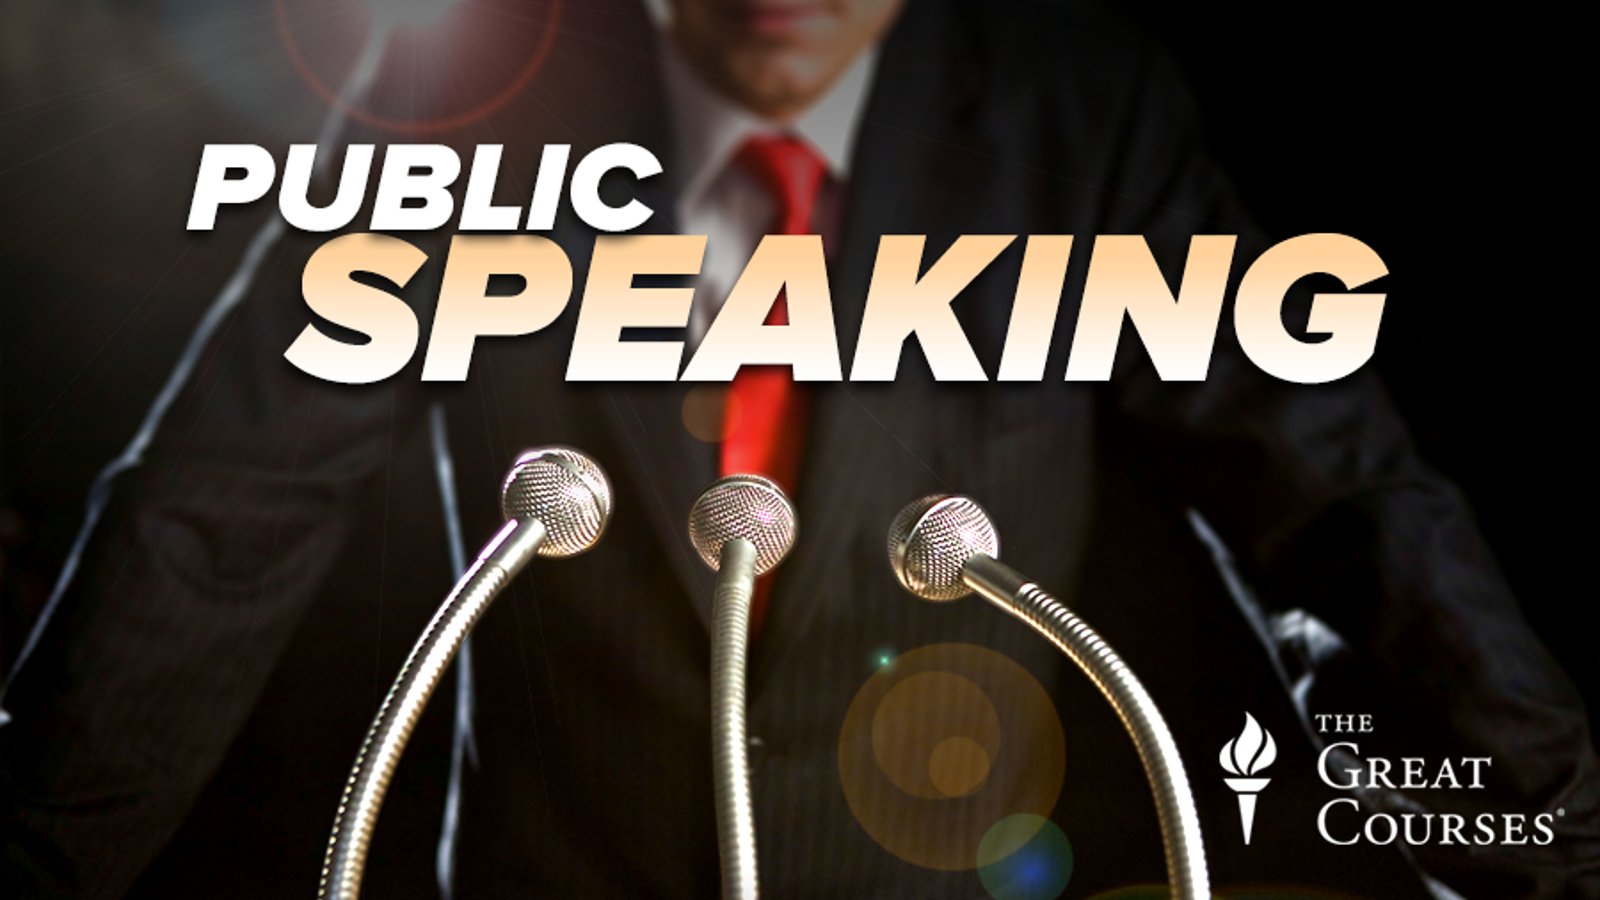 The Art of Public Speaking - Lessons from the Greatest Speeches in History